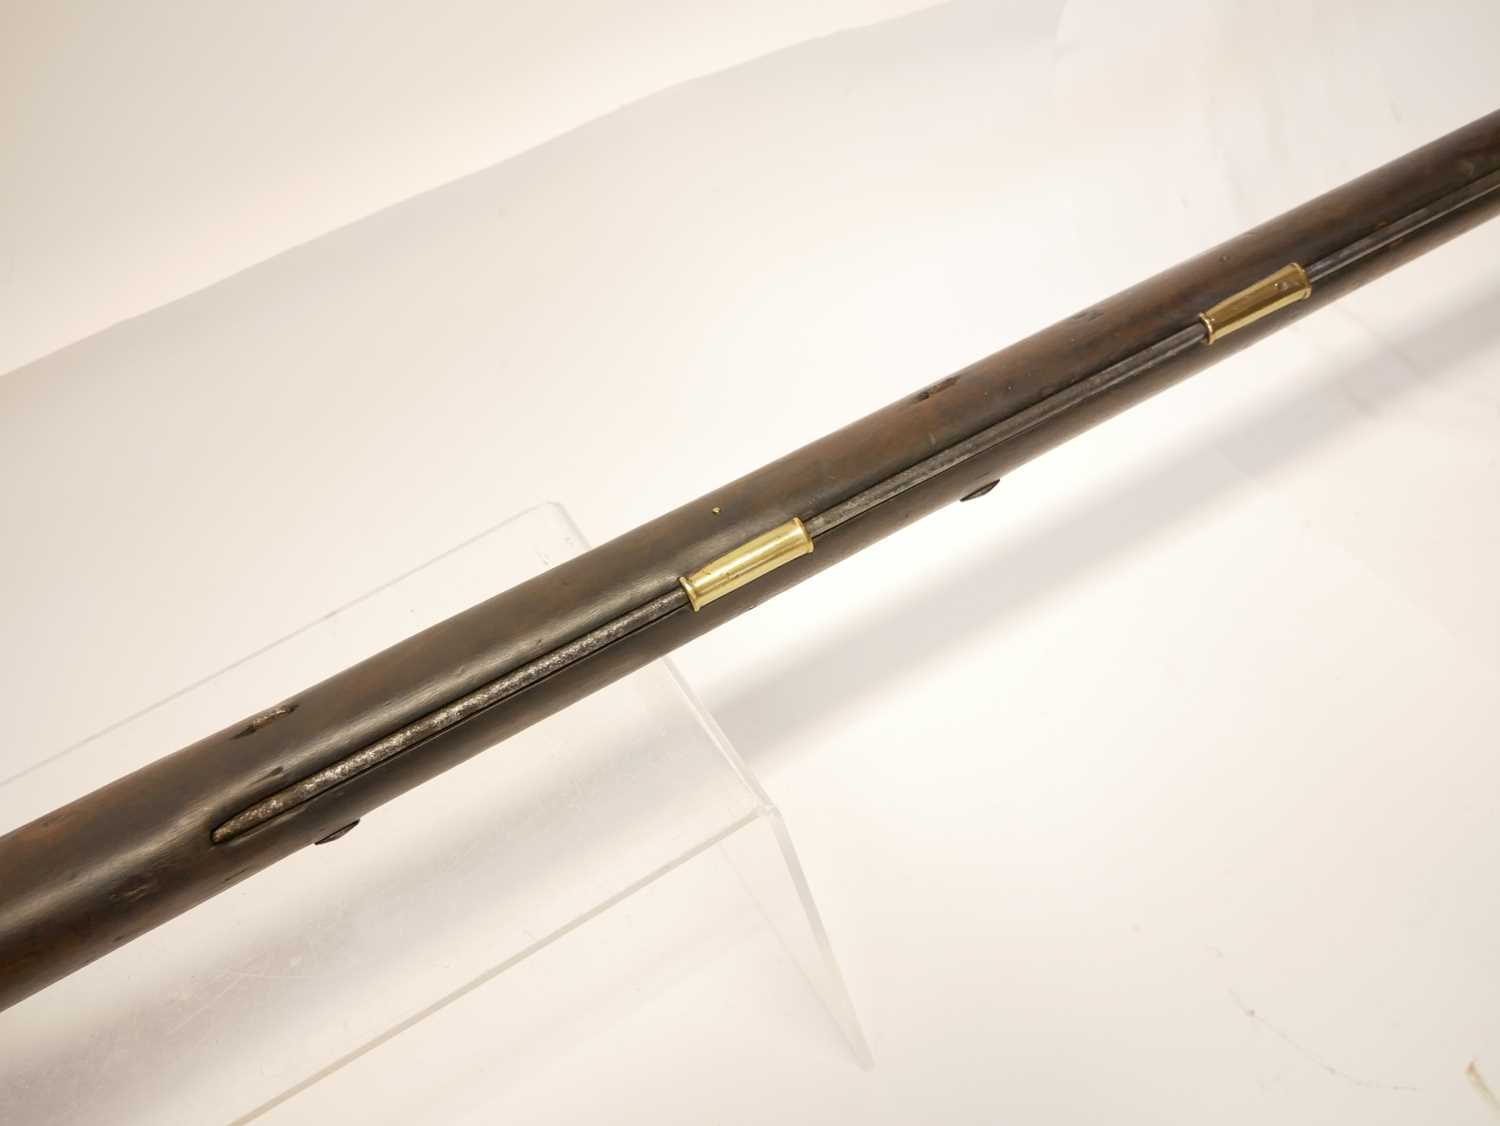 East India Company pattern D type 3 musket, - Image 8 of 14